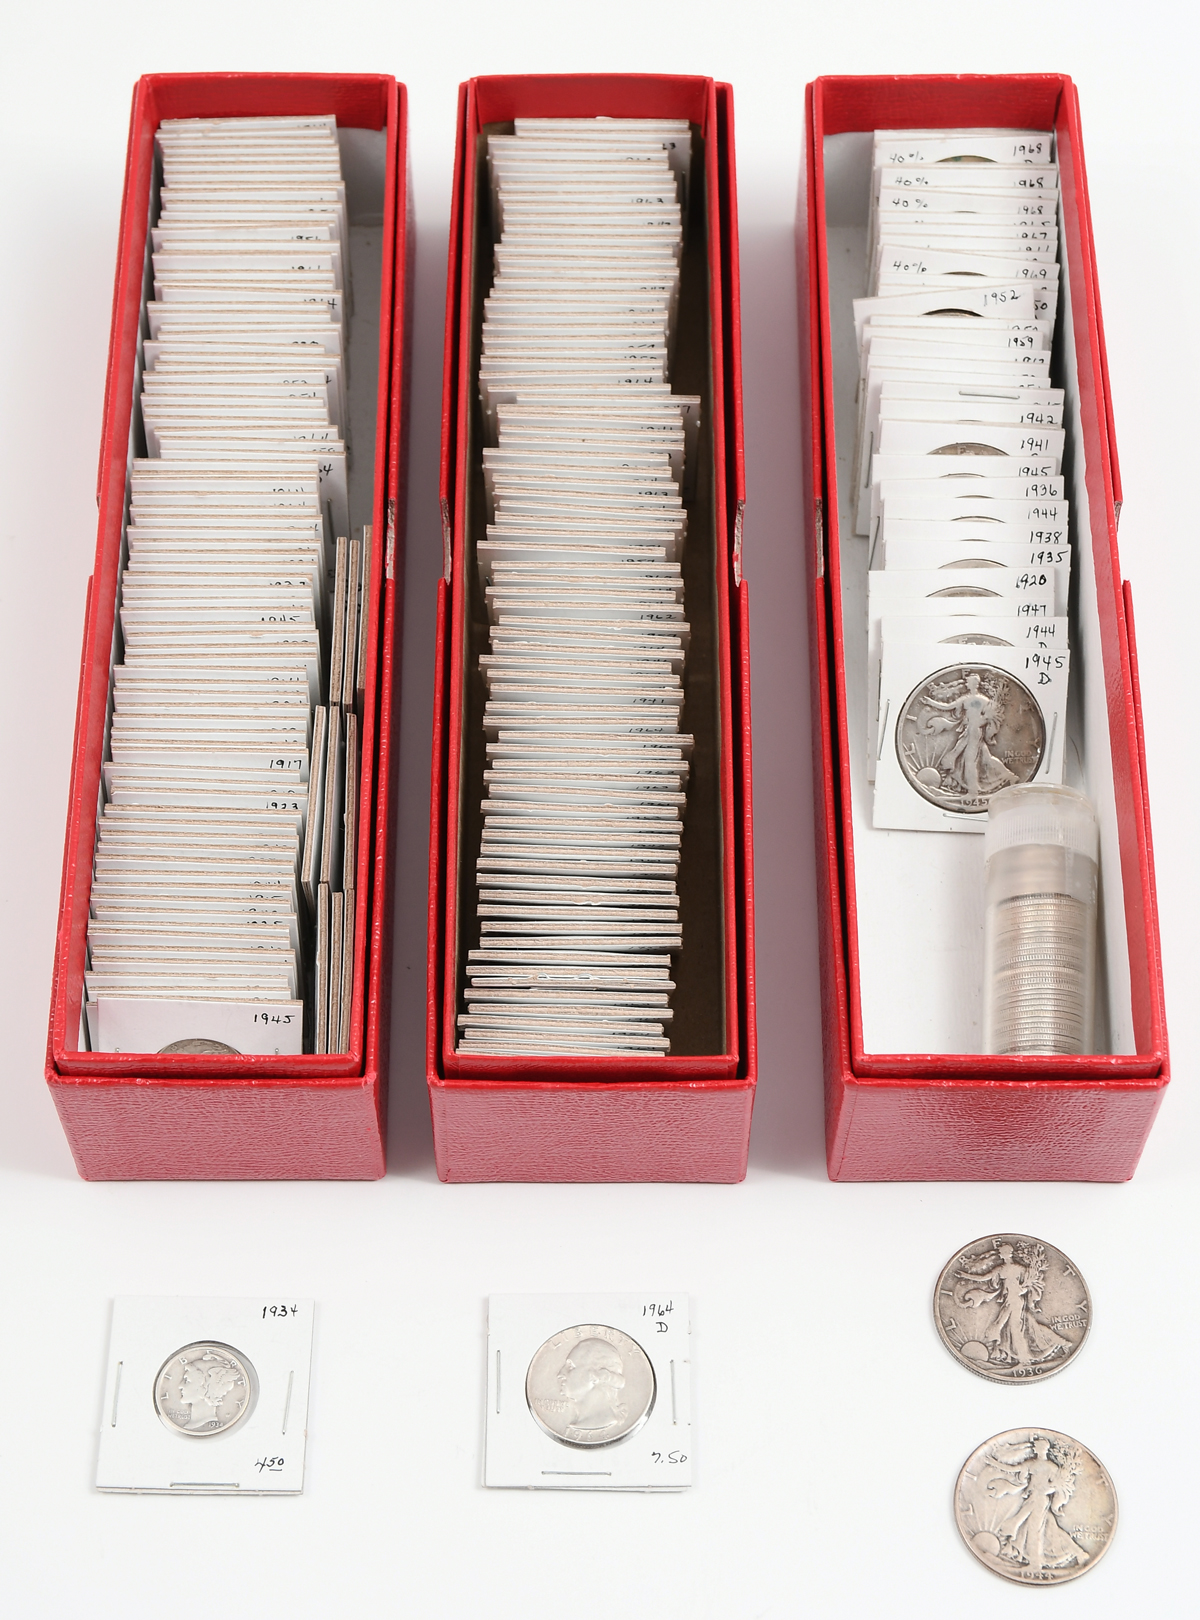 250+ U.S. MINT SILVER COIN COLLECTION: